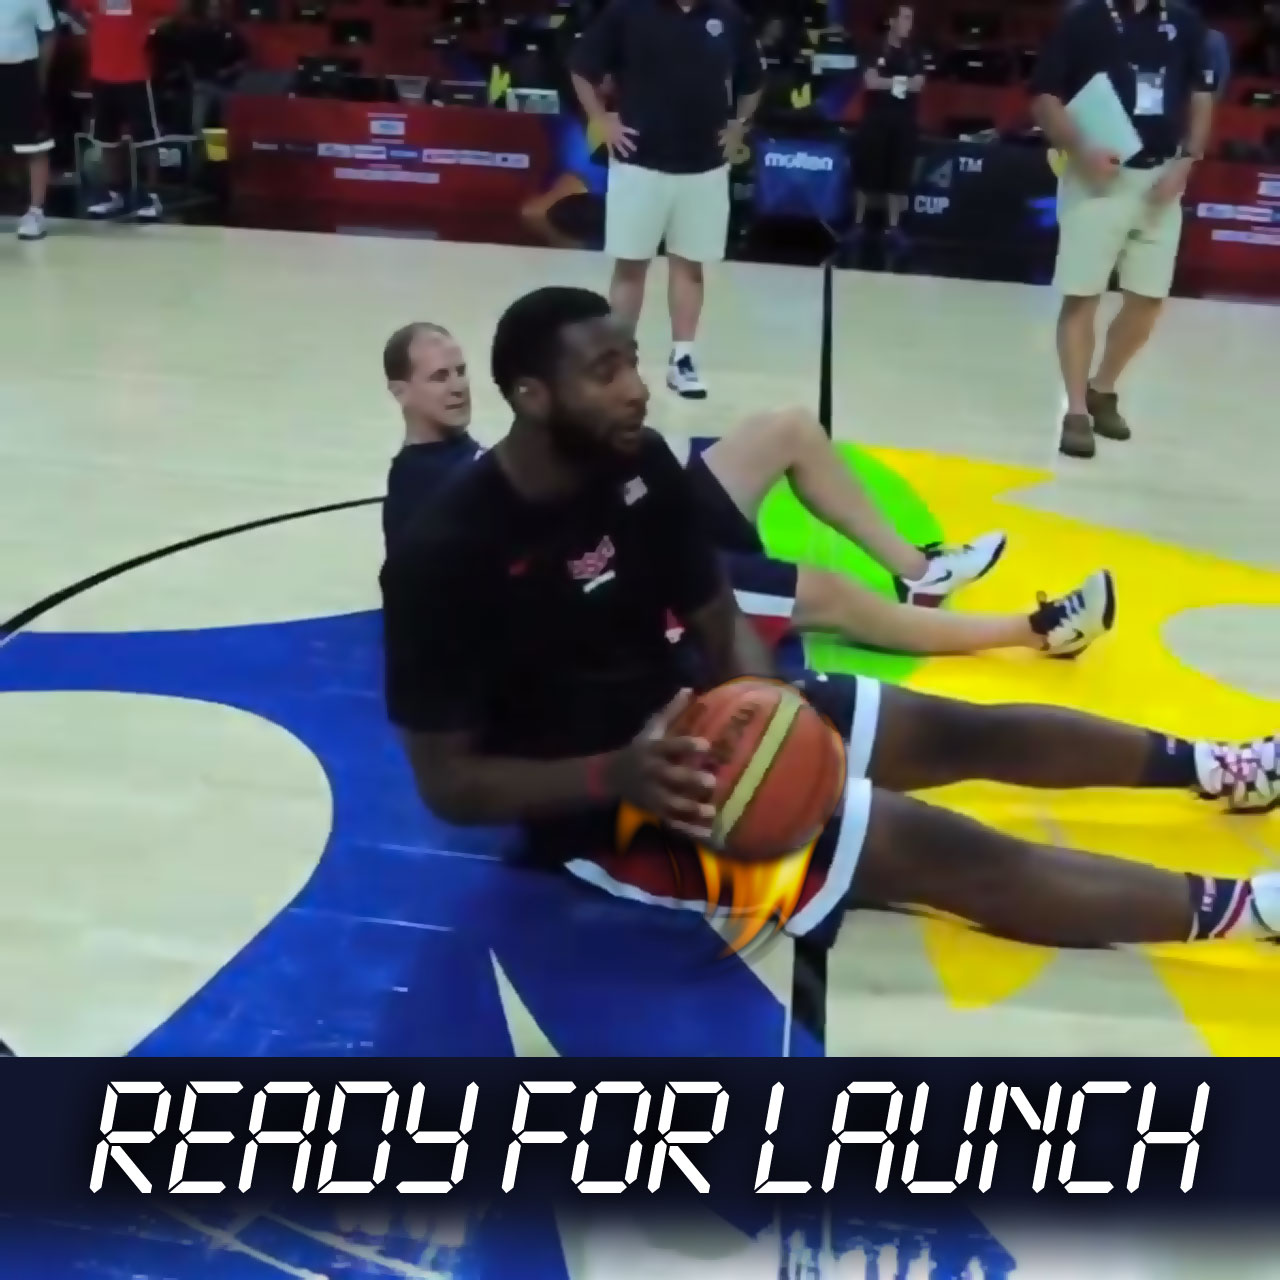 Pistons center Andre Drummond prepares to launch seated half court shot